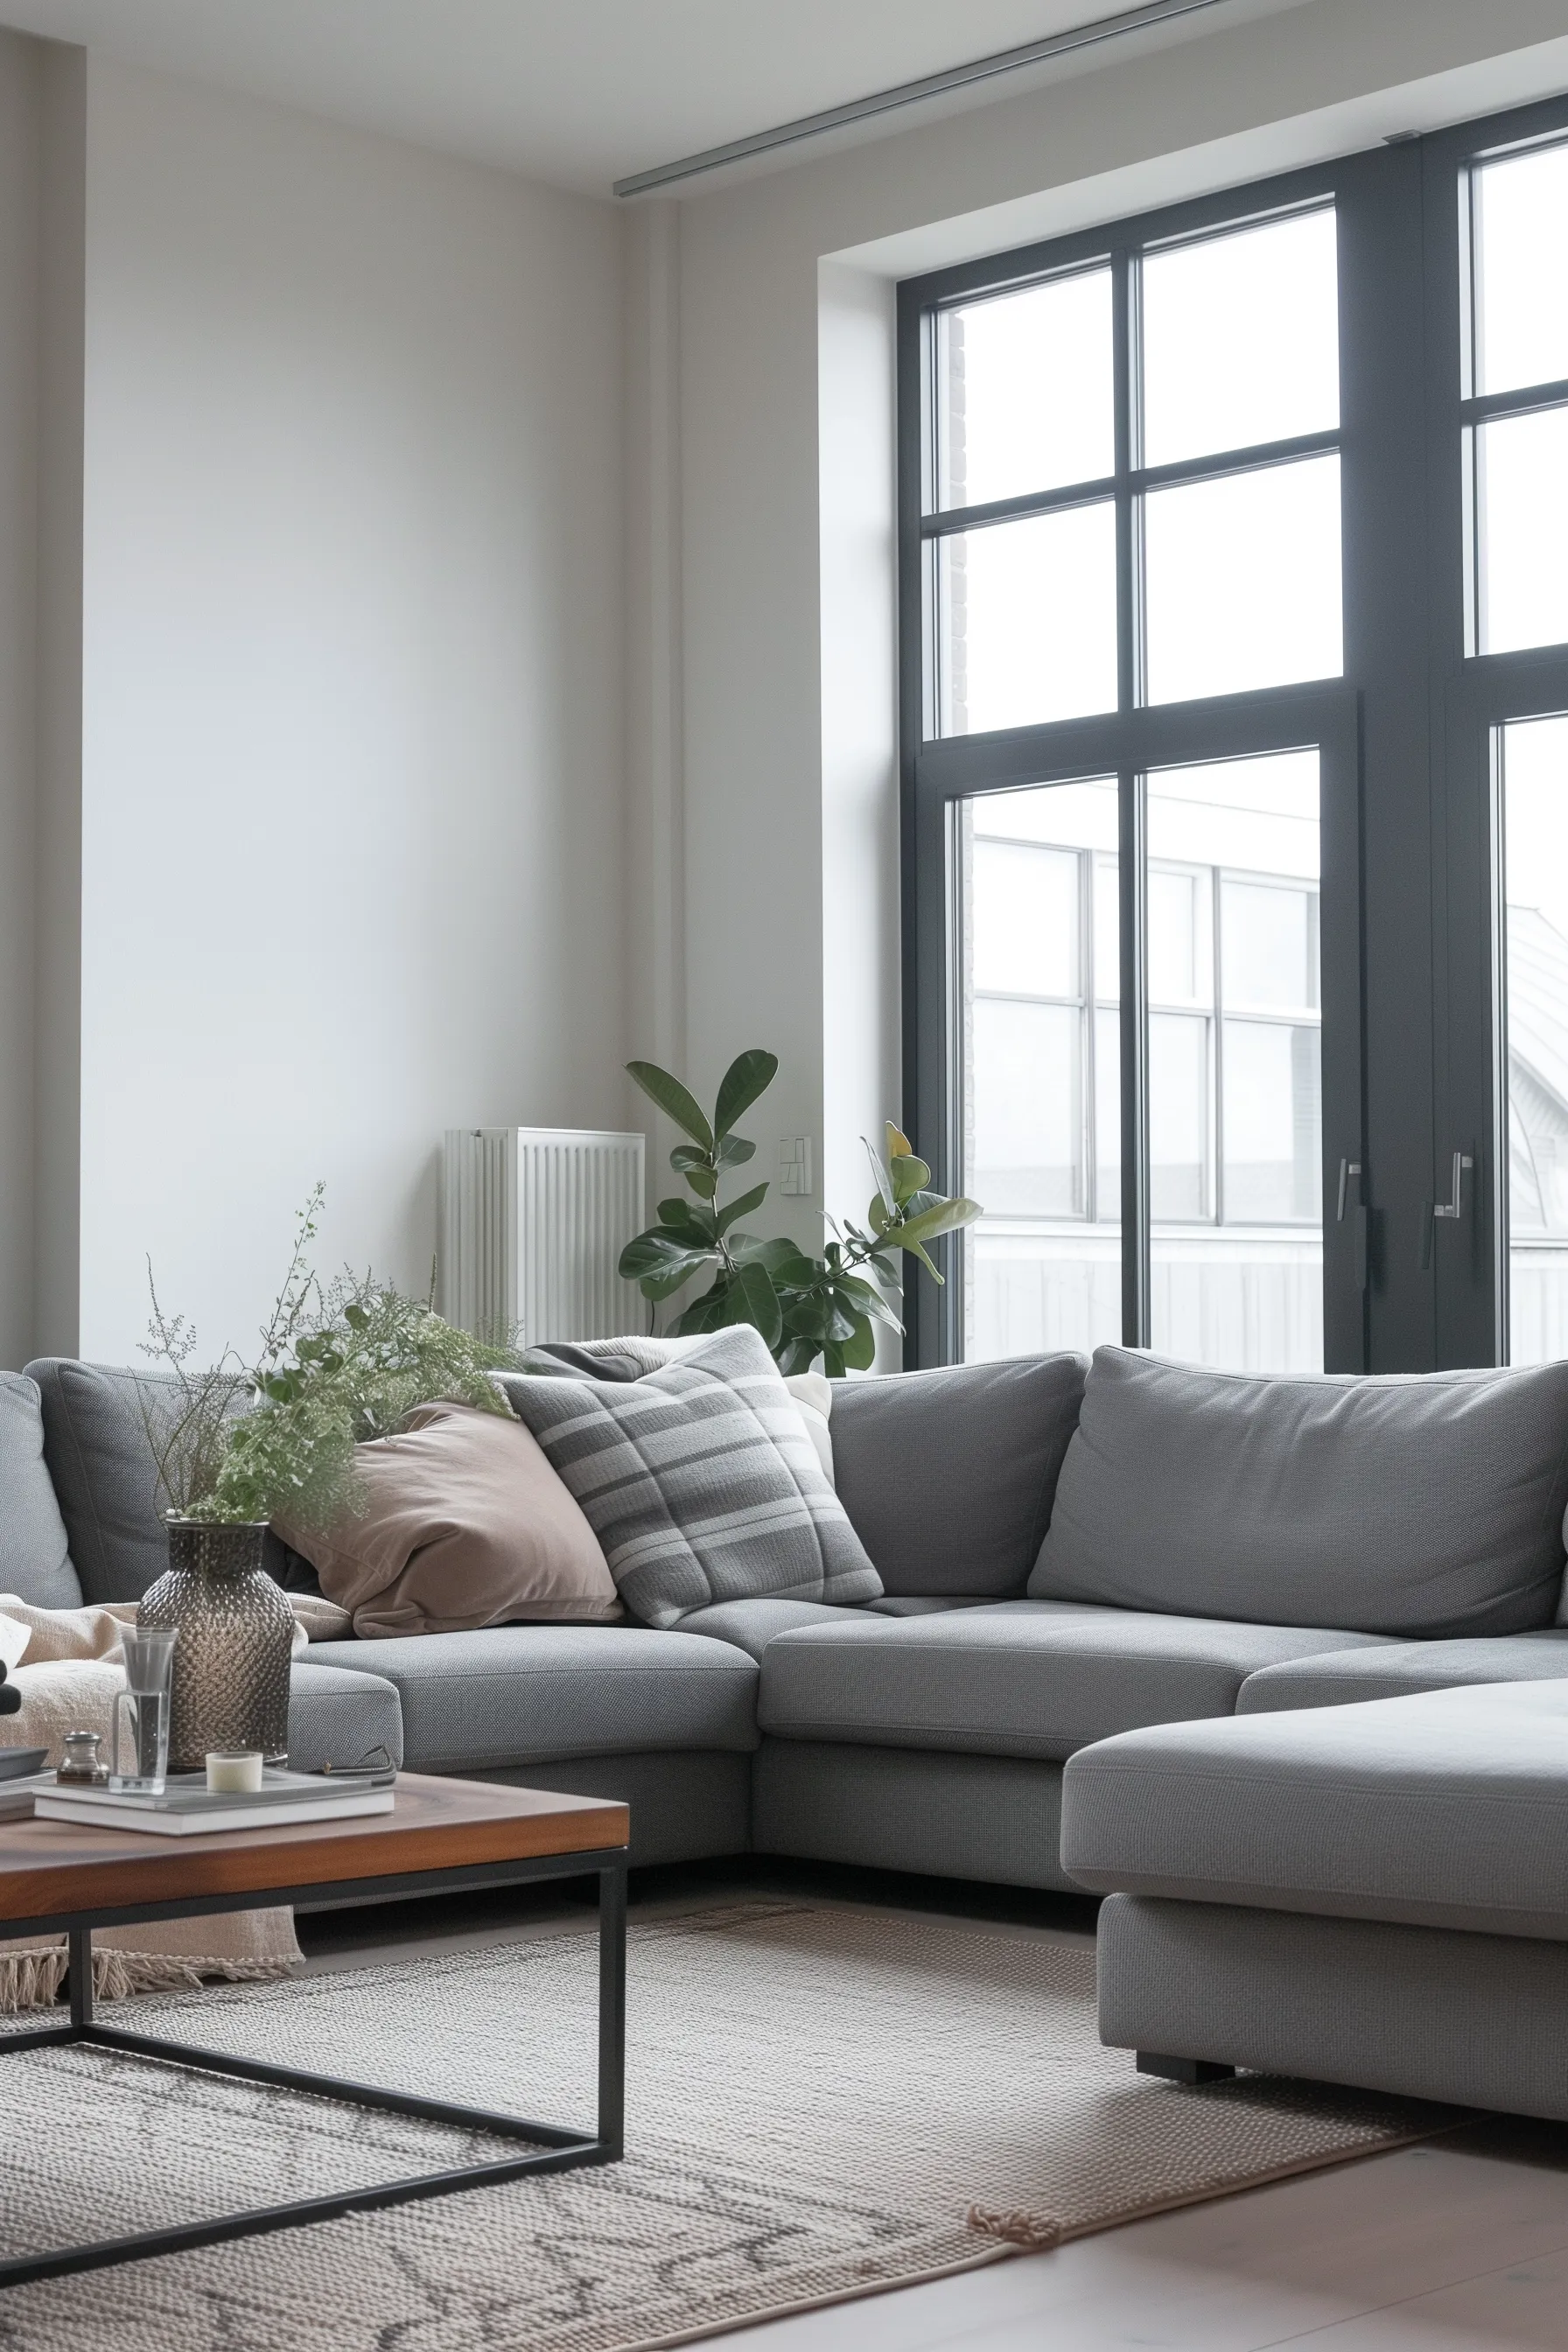 A grey L couch with throw pillows, a coffee table and plants